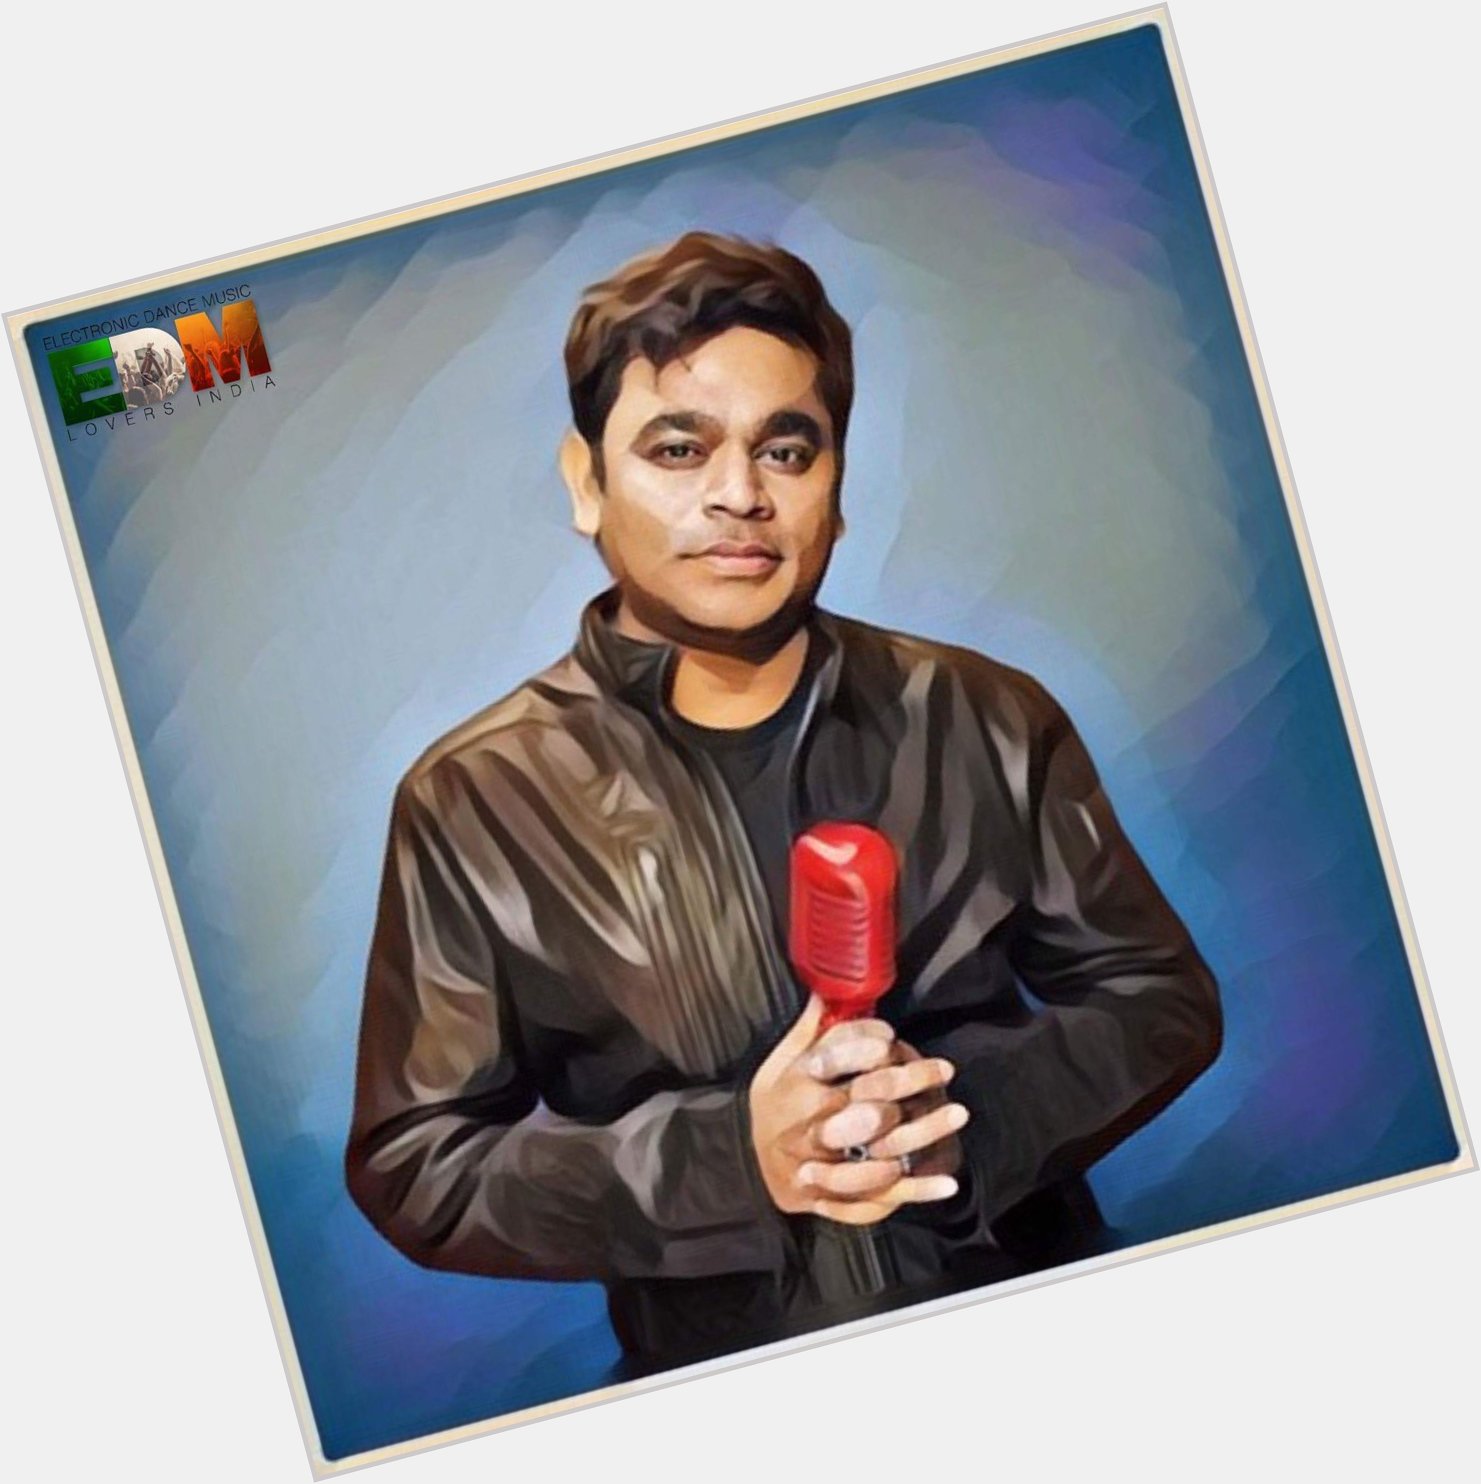 We wish the legend A.R.Rahman a very Happy Birthday , you and your music is an inspiration for millions. 